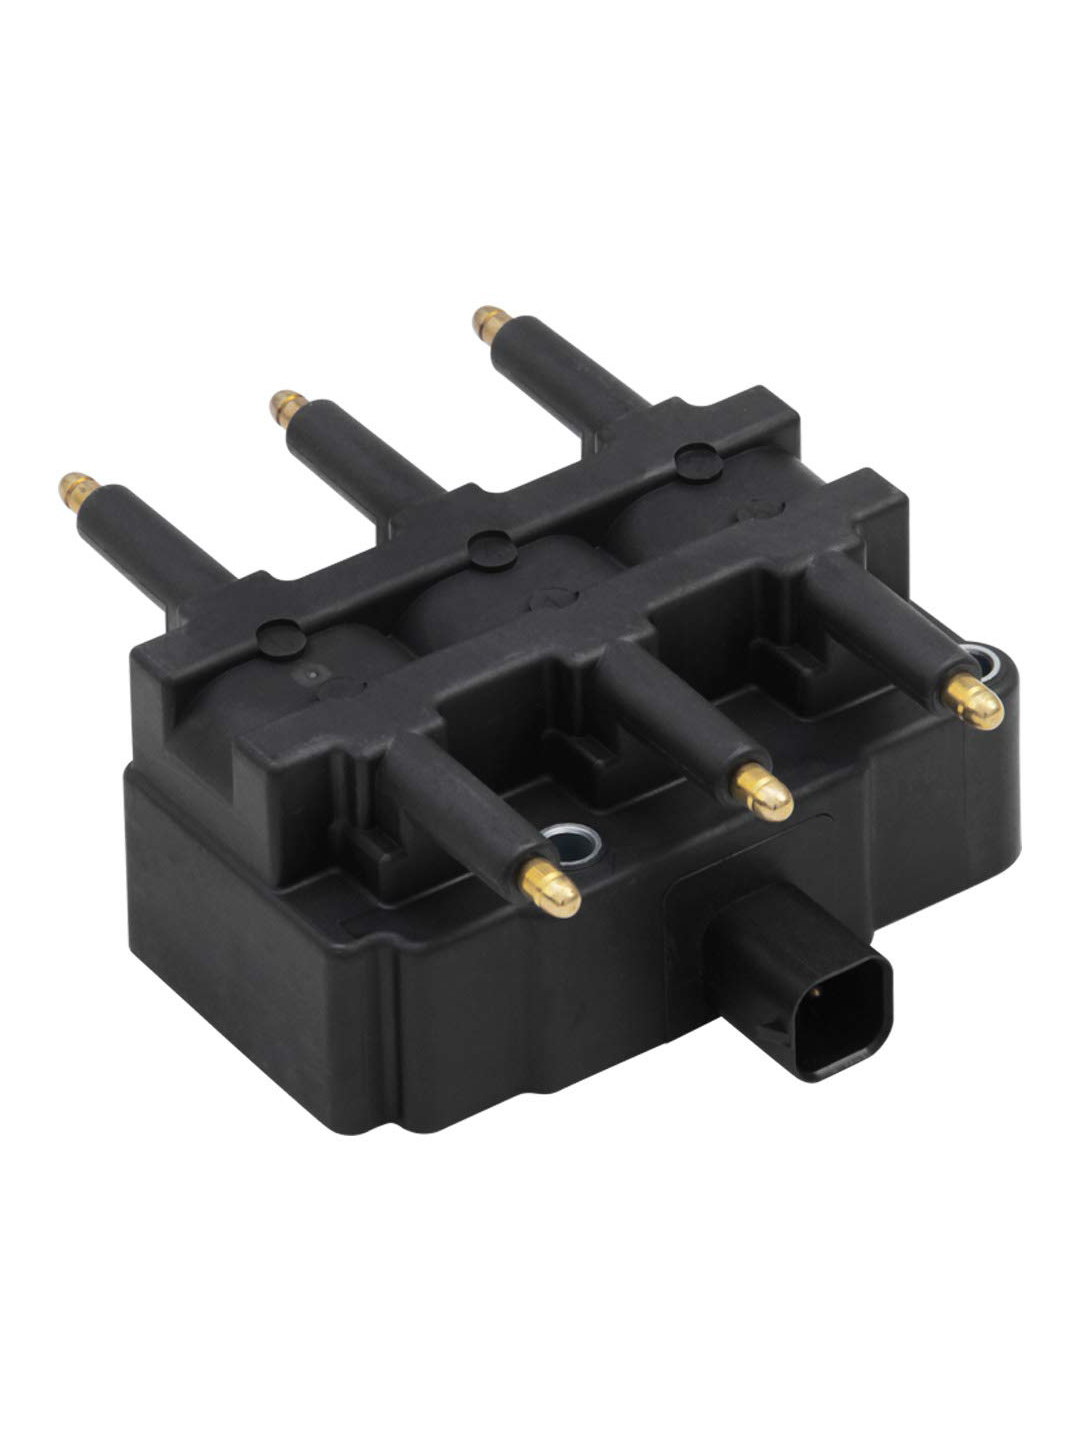 New Ignition Coil Pack Compatible with 2007-2011 Jeep Wrangler 3.8L V6  Compatible with UF305 C1442